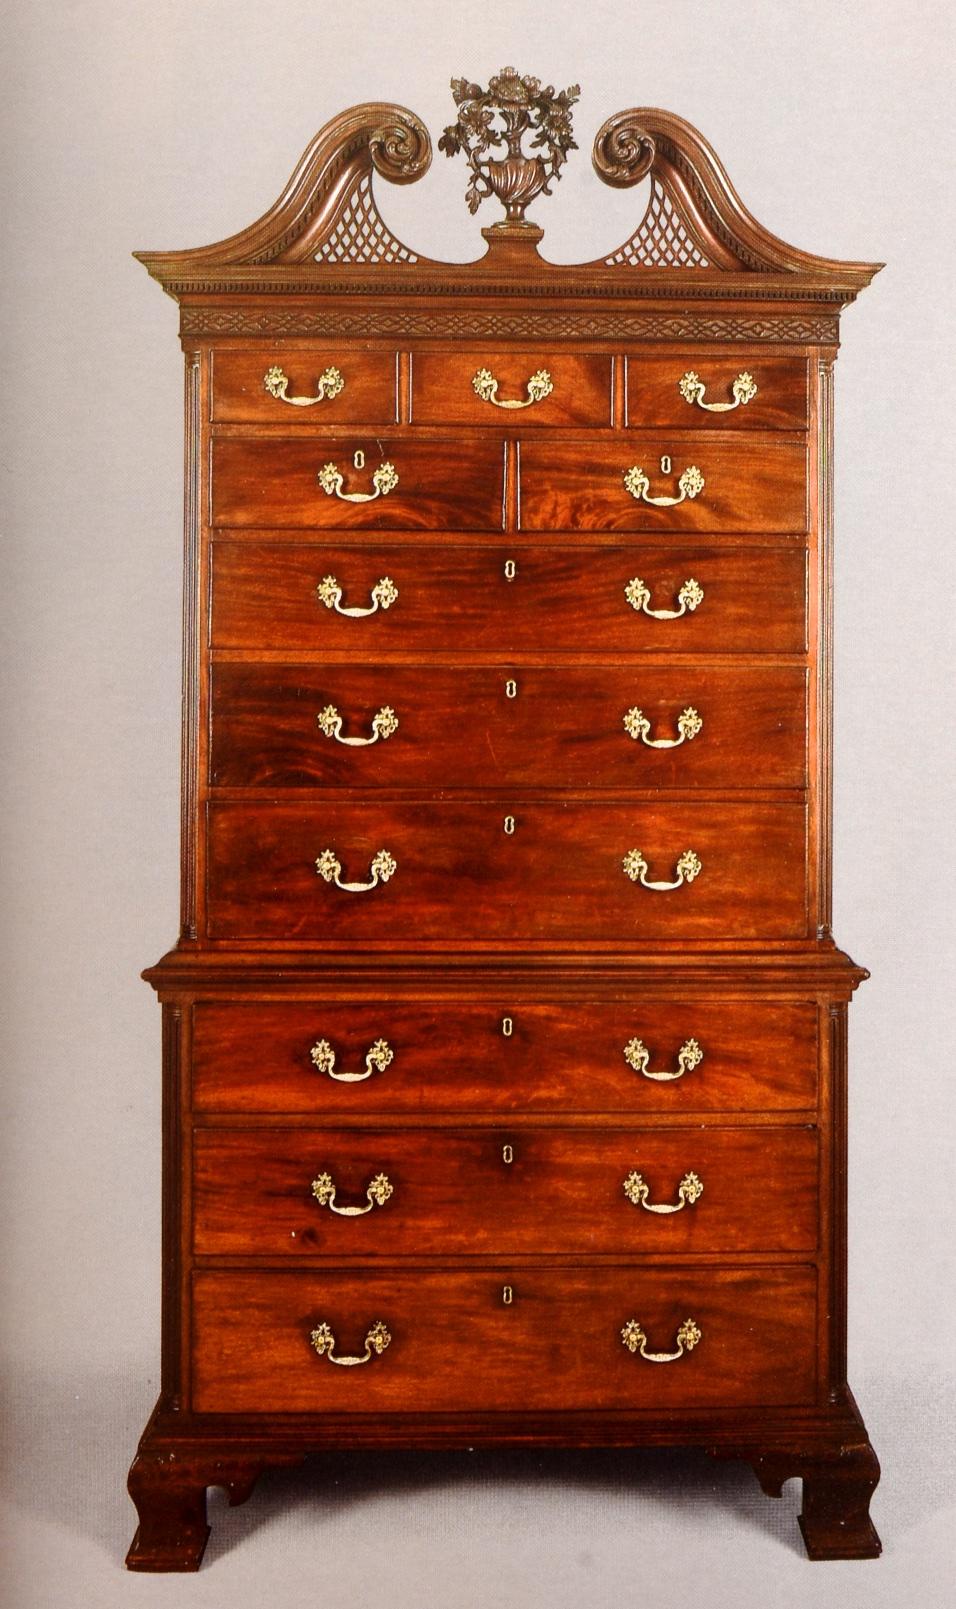 Sotheby's: Important American Furniture, Contents of 